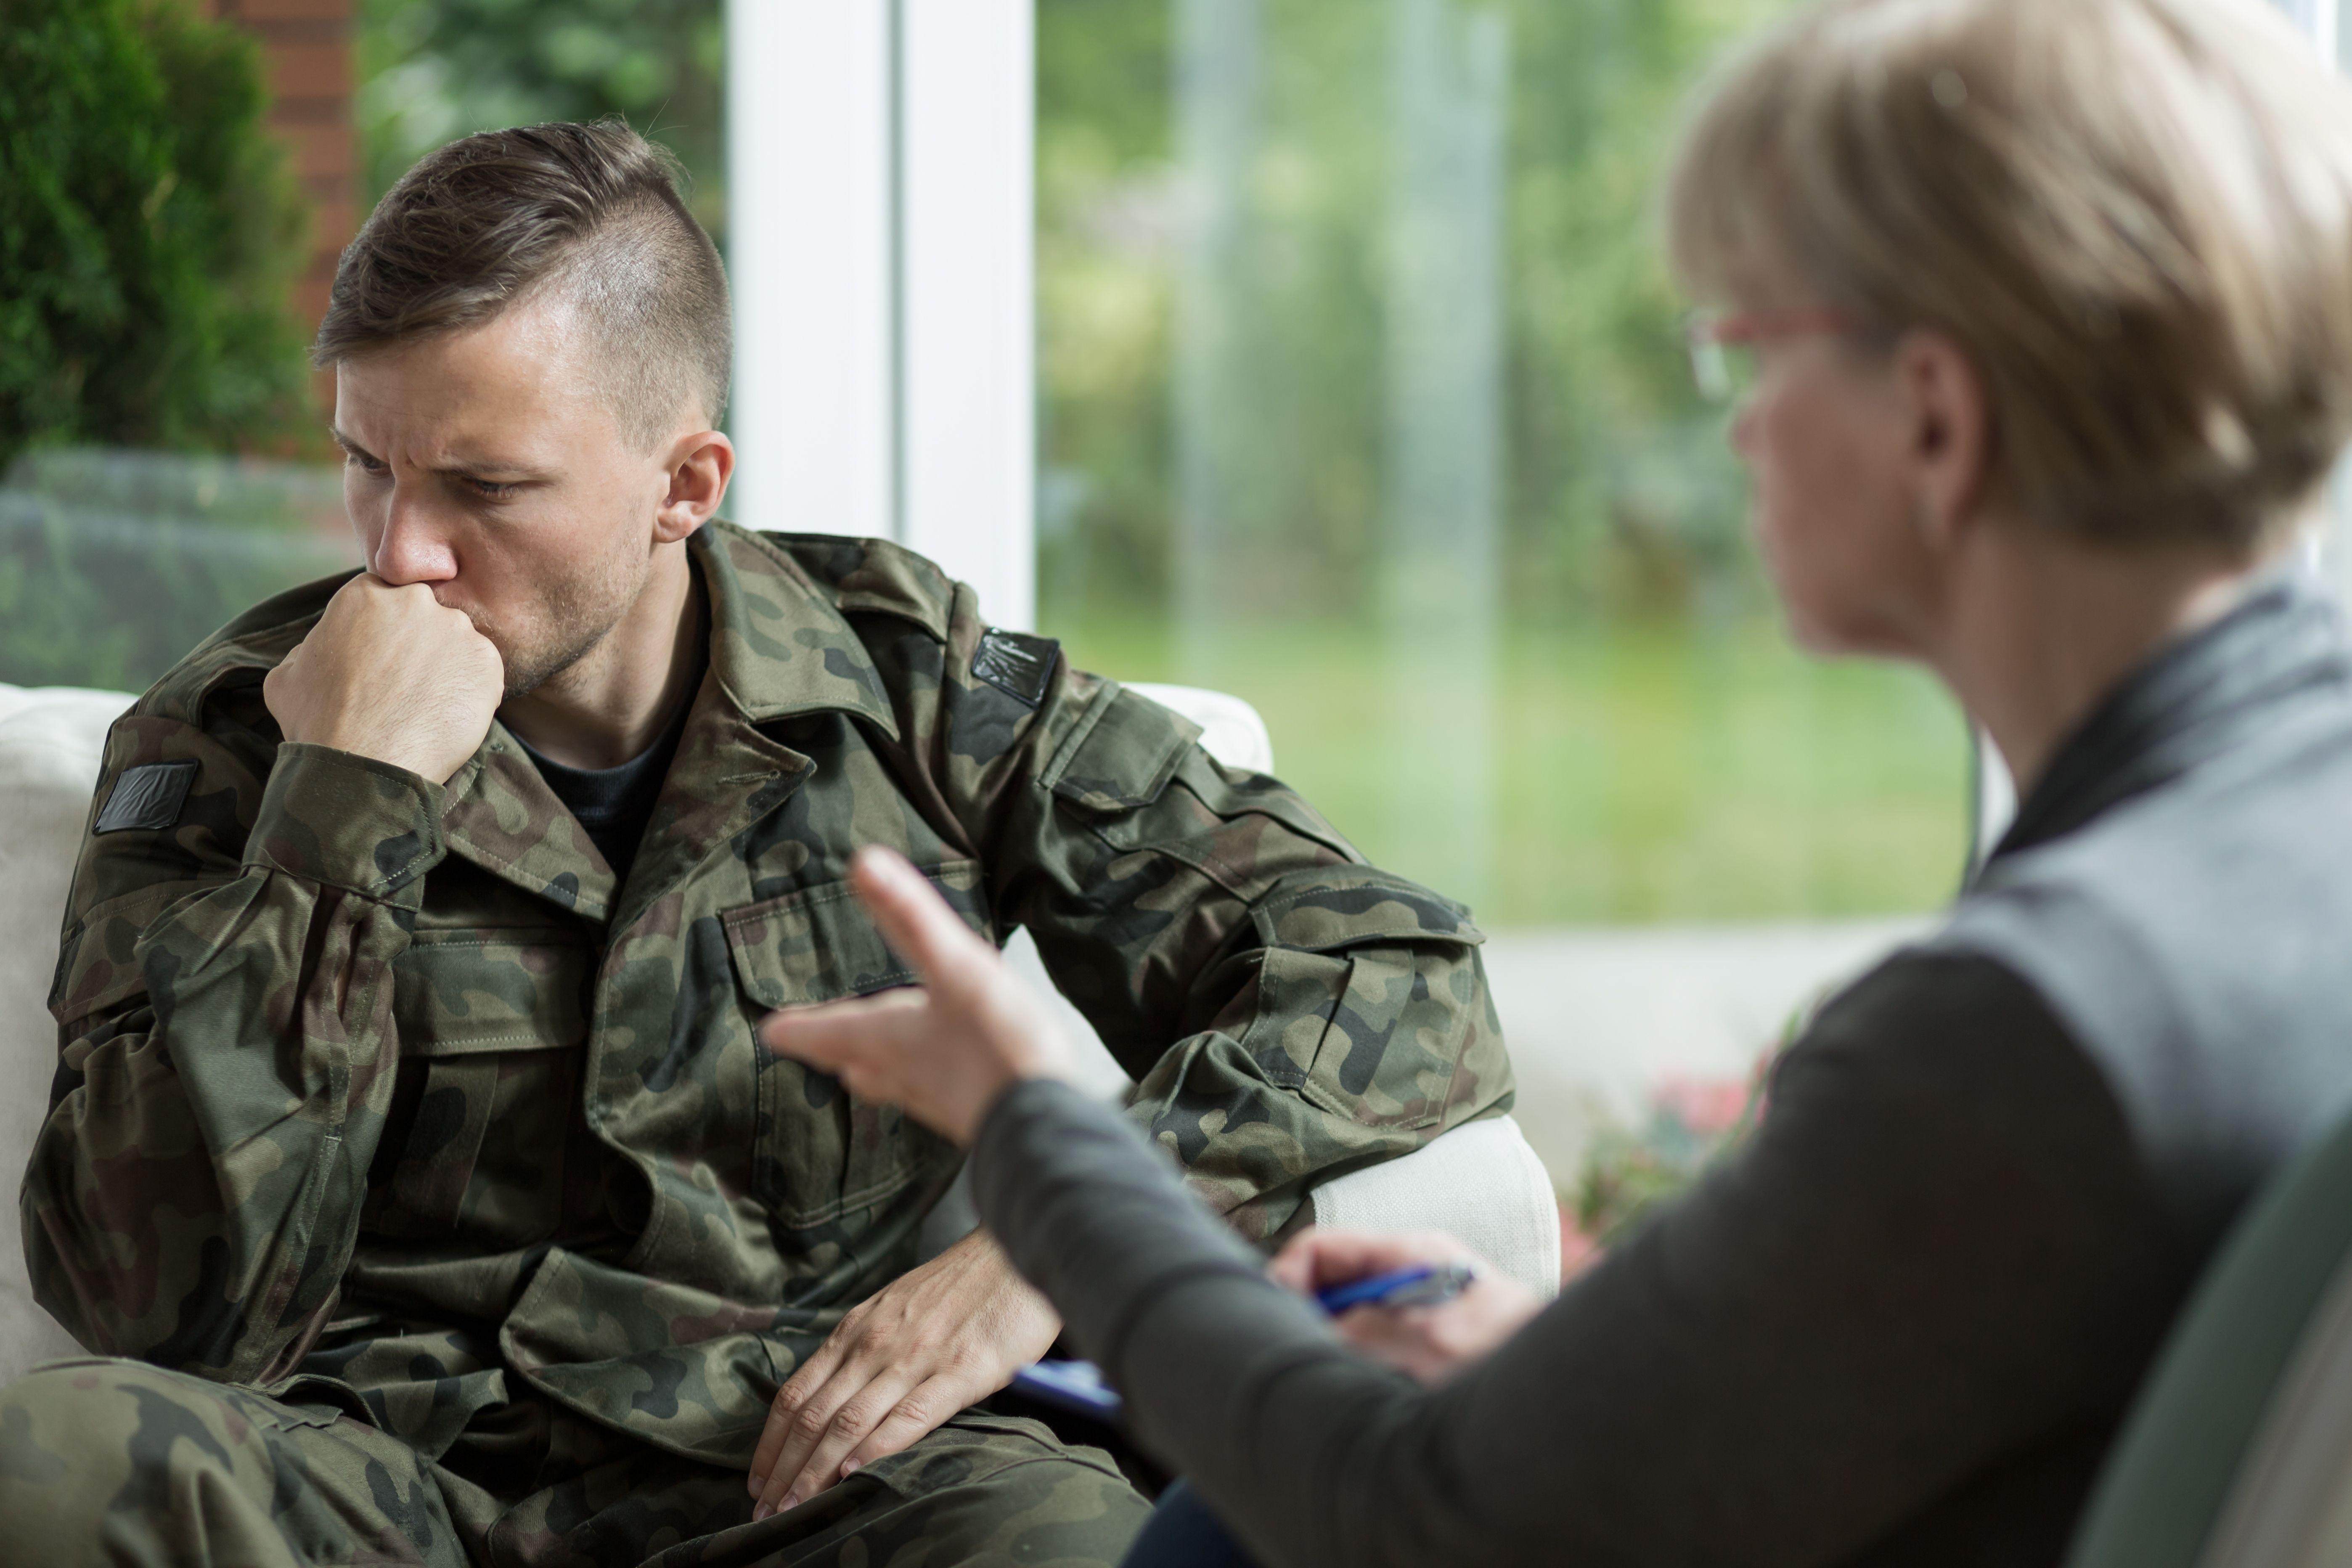 How To Become A Military or Veterans Counselor